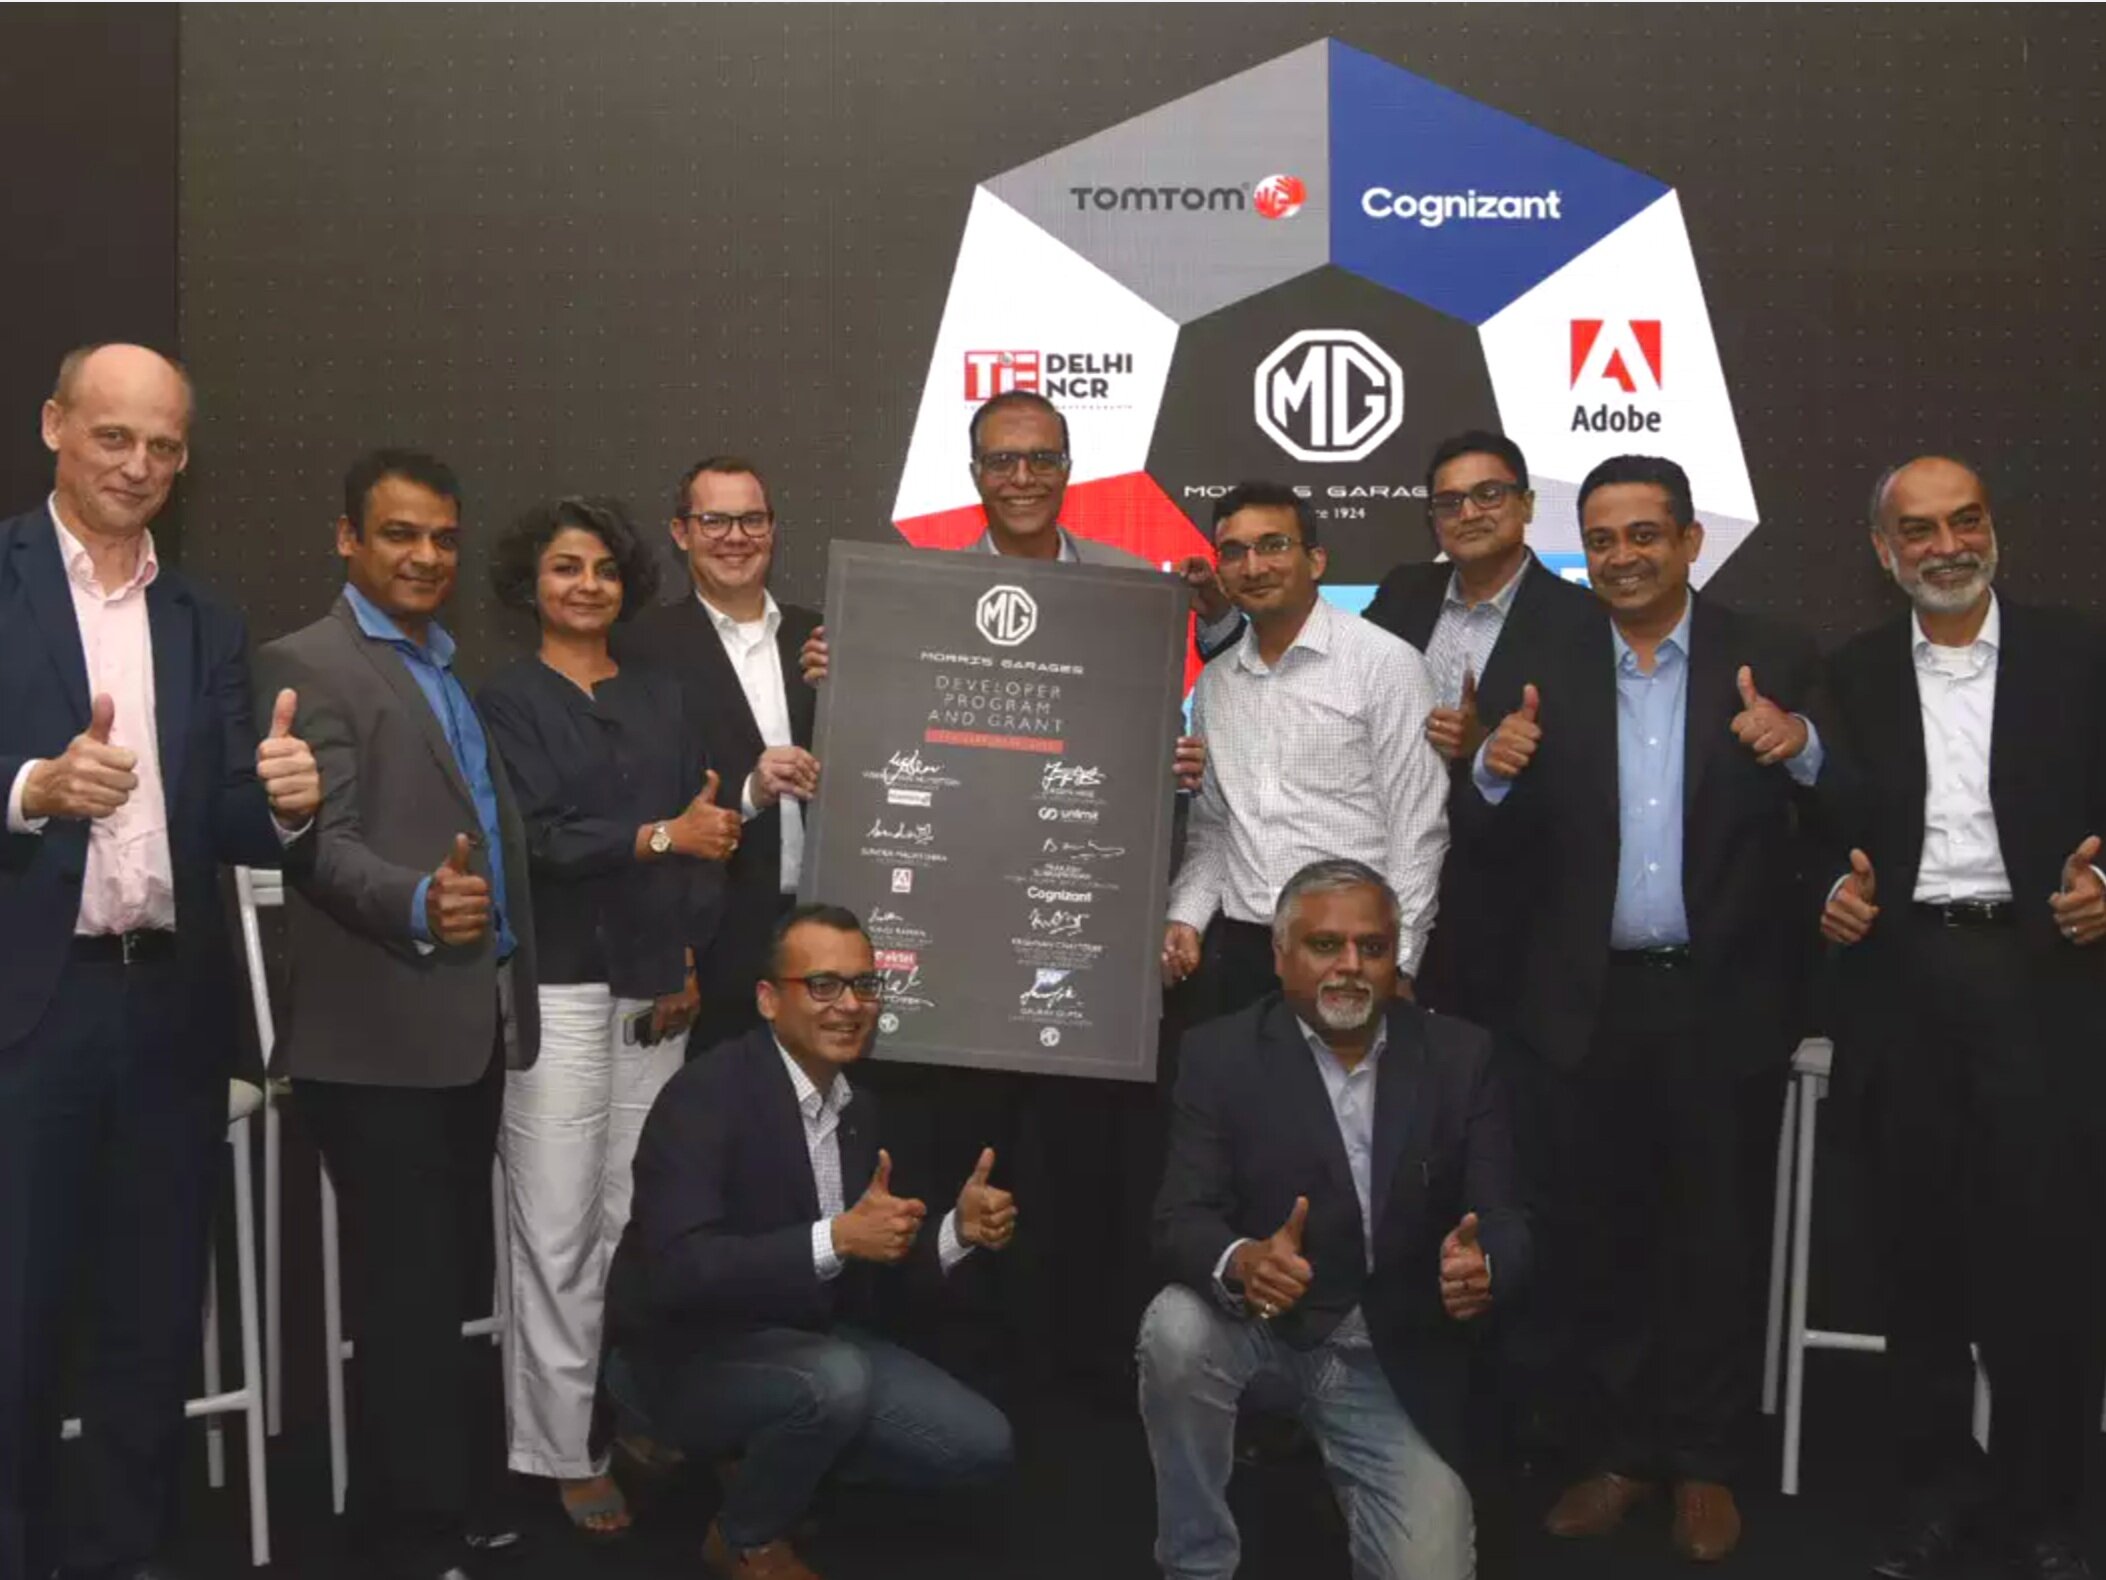 MG bought TomTom's smart technology for its first, Indian-made connected car: the MG Hector